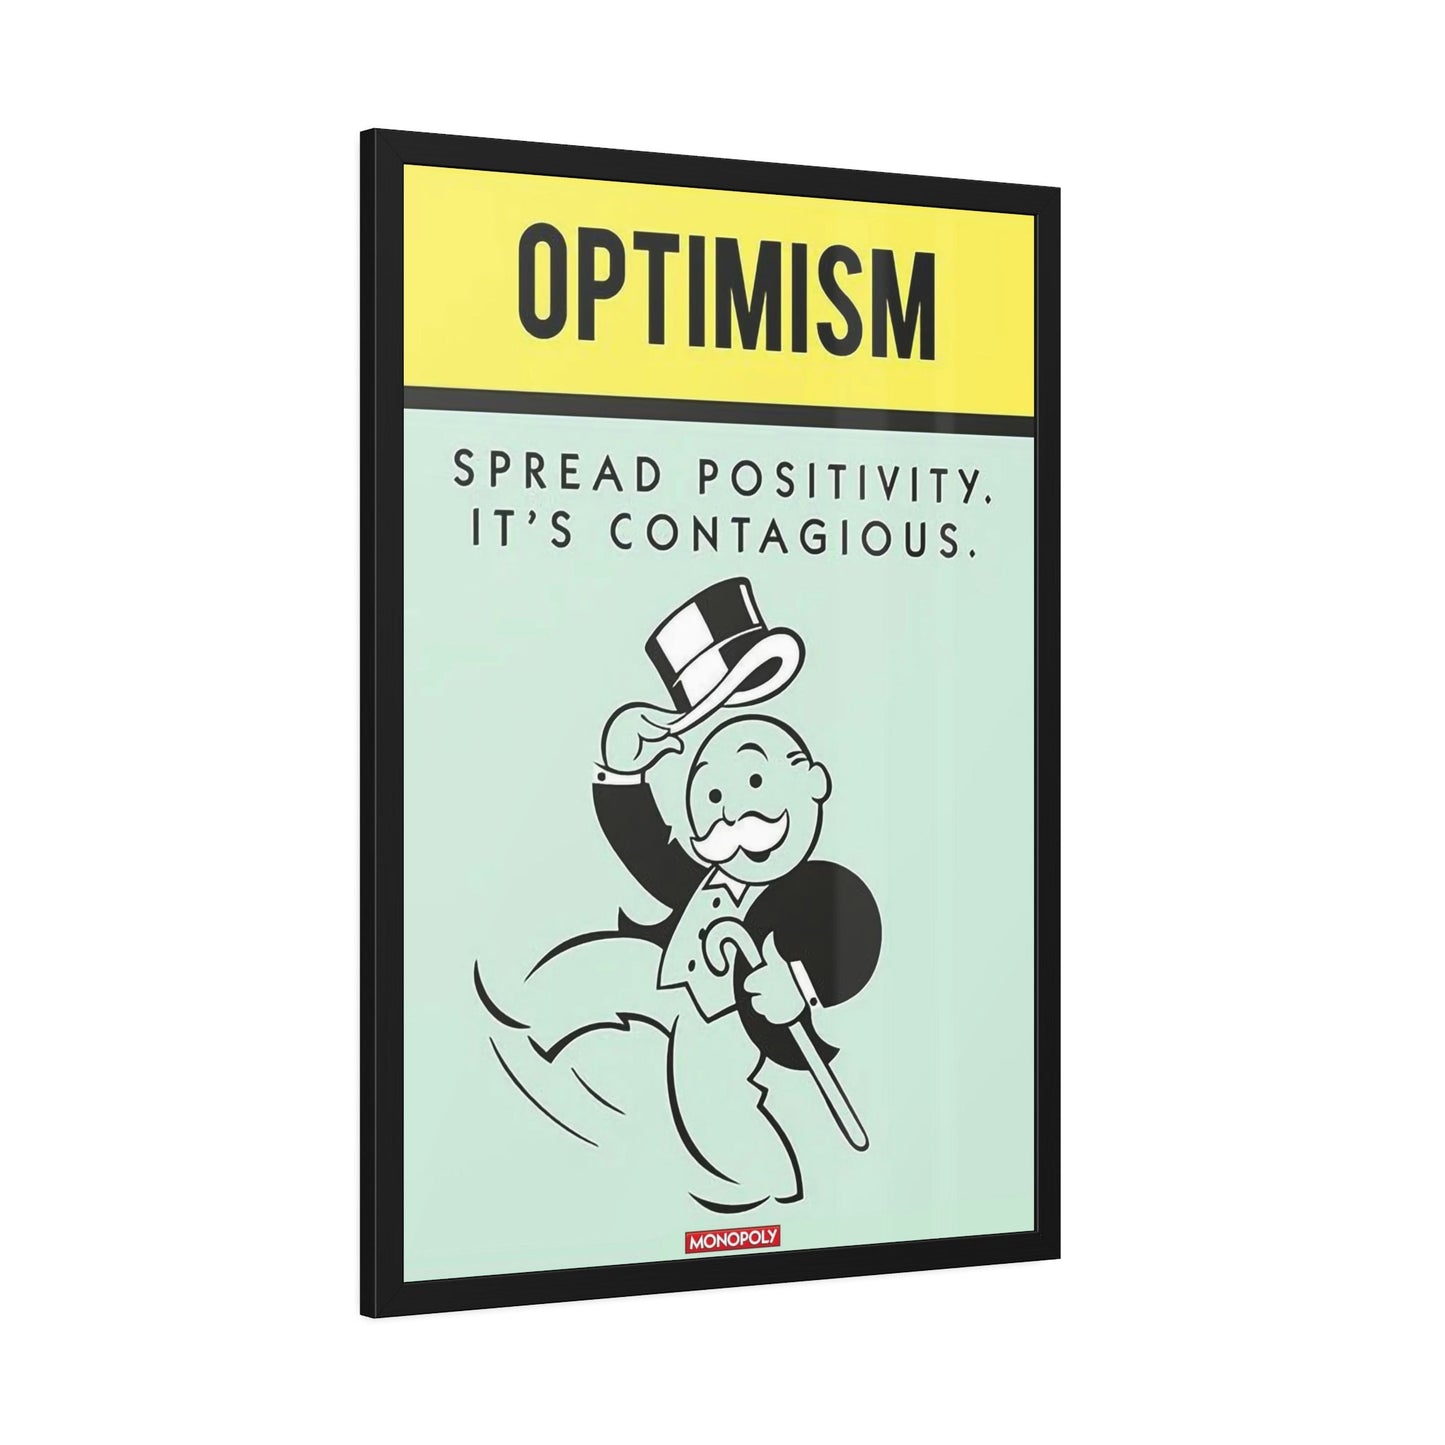 Colorful and Inspiring: Alec Monopoly's Quote Canvas and Poster Print